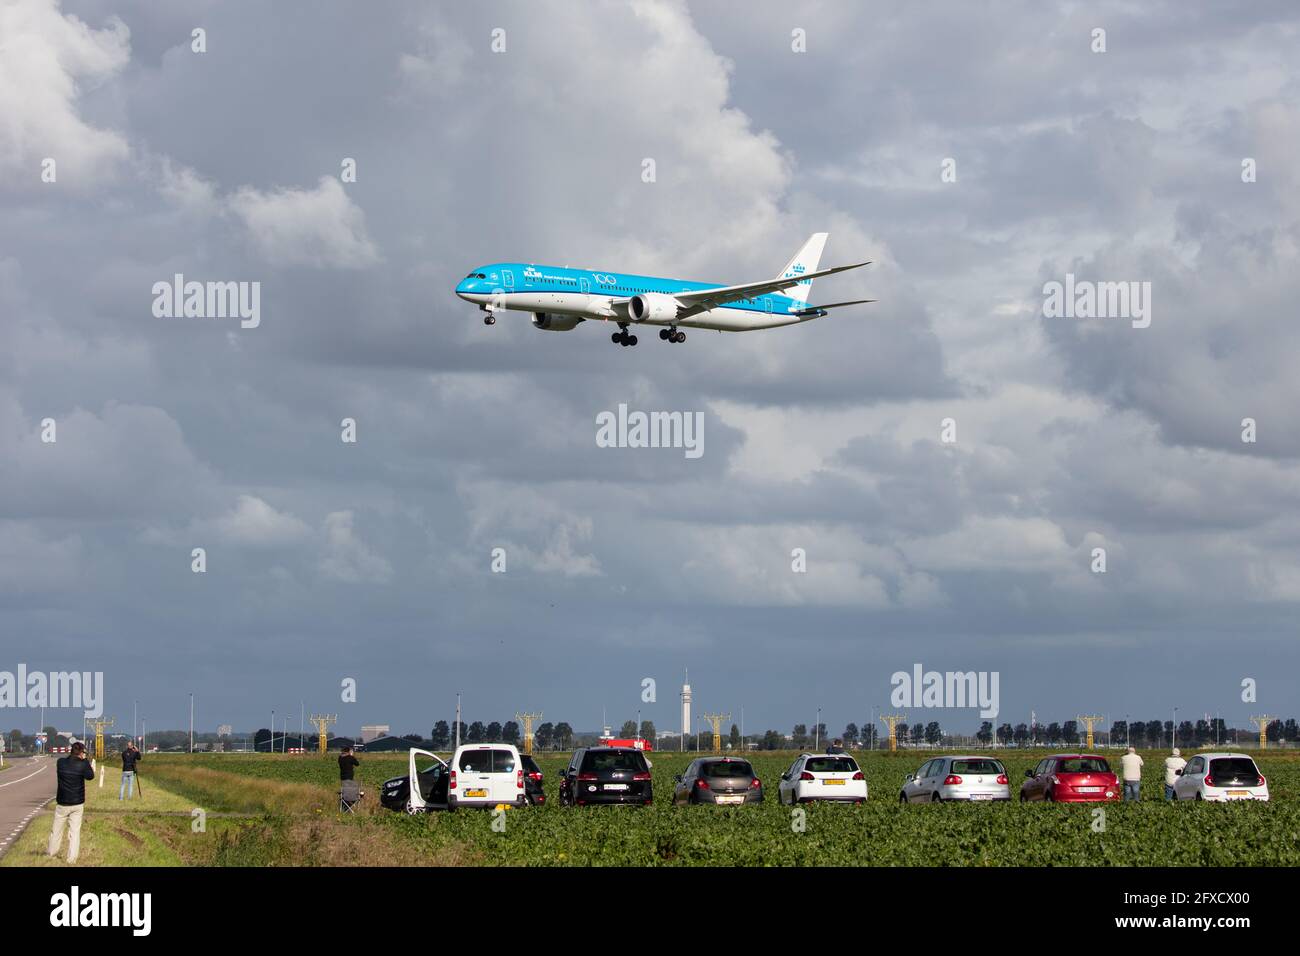 AMSTERDAM, NETHERLANDS - Sep 13, 2020: KLM (KL / KLM) approaching Amsterdam Schiphol Airport (EHAM/AMS) with a Boeing 787-9 Dreamliner B789 (PH-BHG/38 Stock Photo